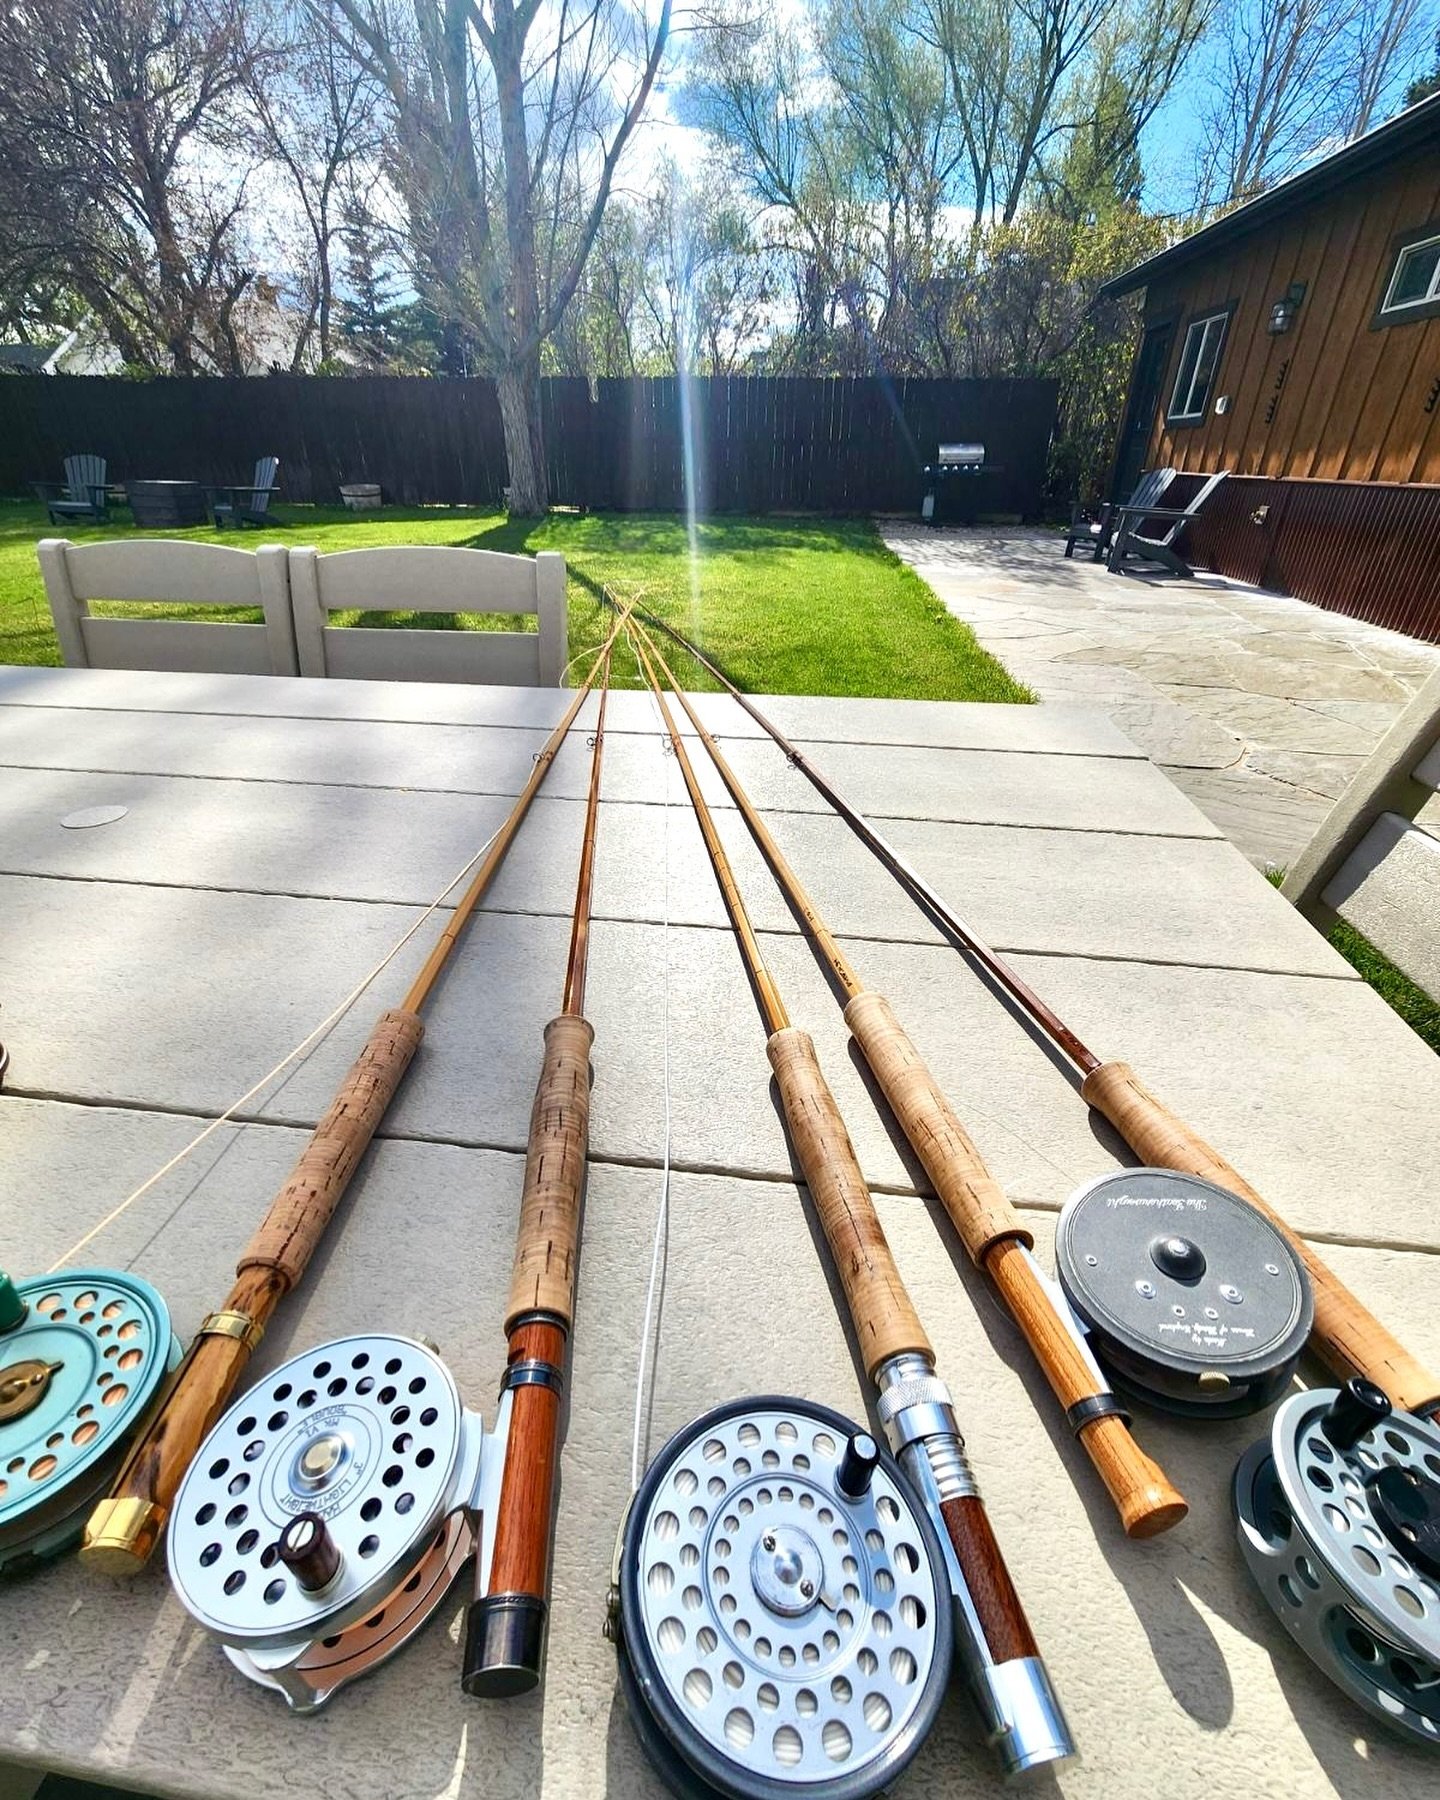 #BambooRabbitHole. Our buddy Andrew came by Thursday and taught us yet another way to avoid working - spend the afternoon pontificating over which of his bamboo fly rods casts the best&hellip;Genius!  #bamboo #bambooflyrod #flyrod #cast #noworktoday